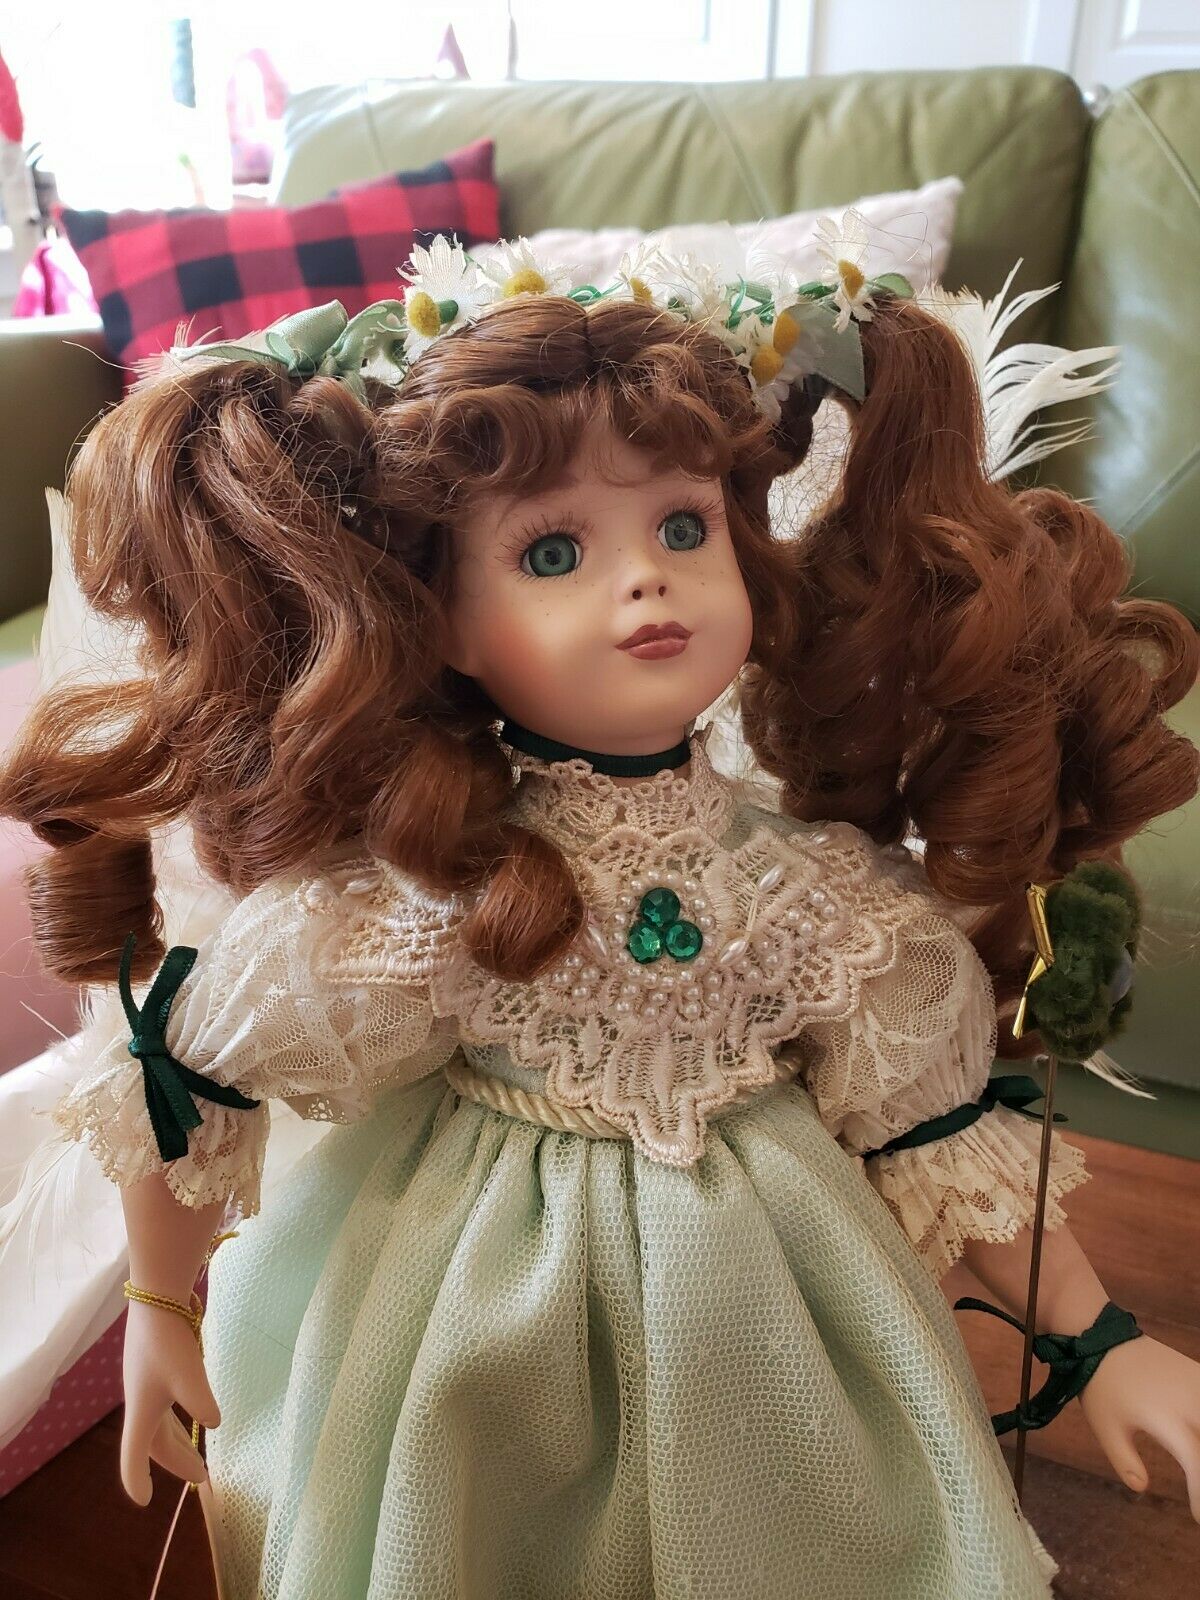 Shannon's Blarney Stone Treasury Collection Paradise Galleries Porcelain Doll